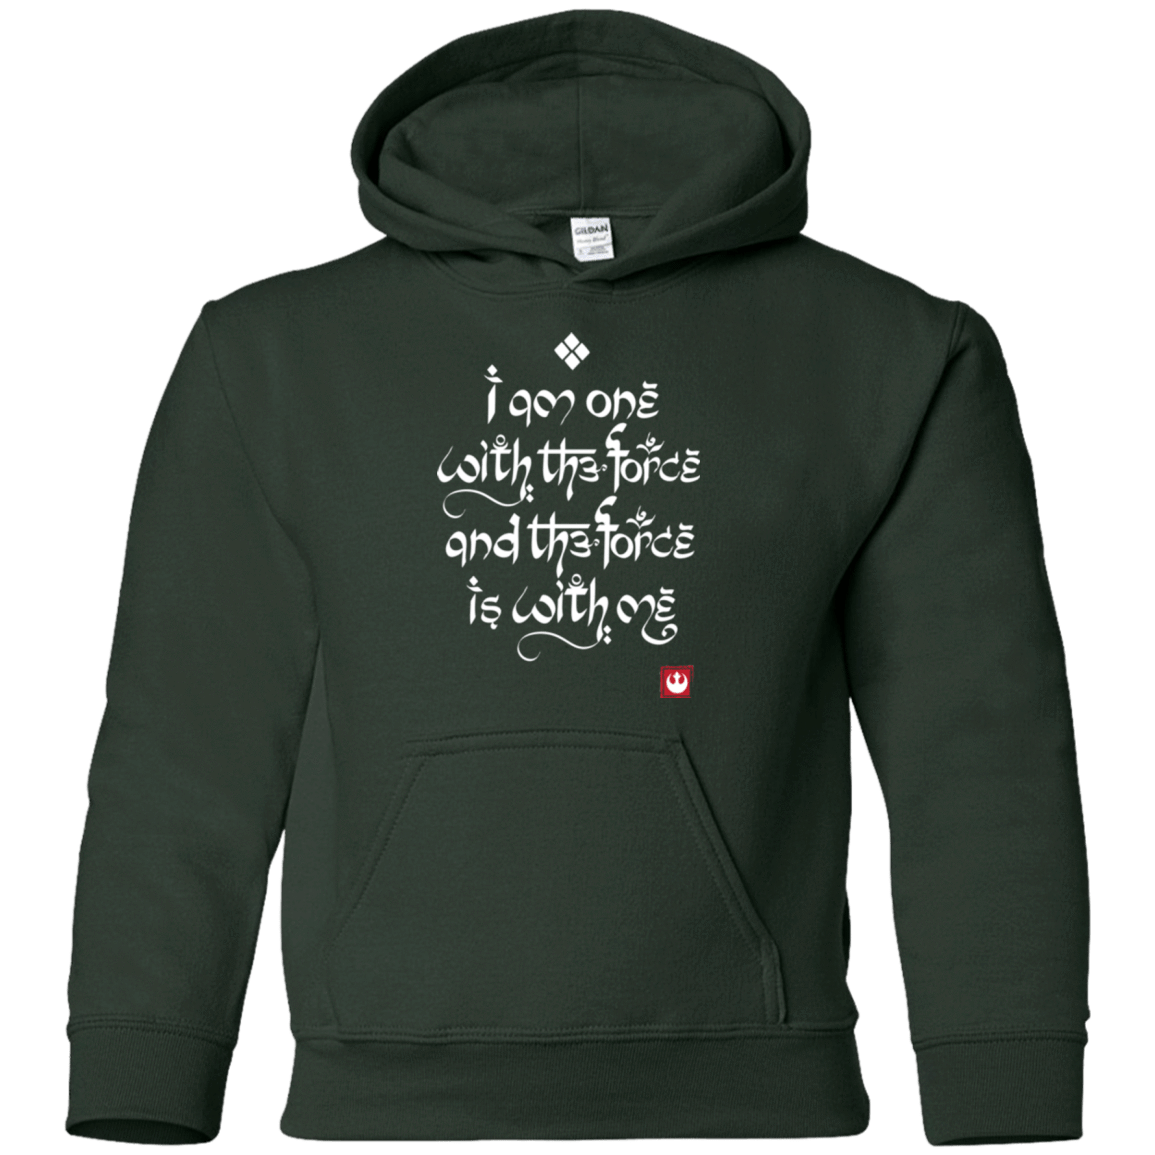 Sweatshirts Forest Green / YS Force Mantra White Youth Hoodie